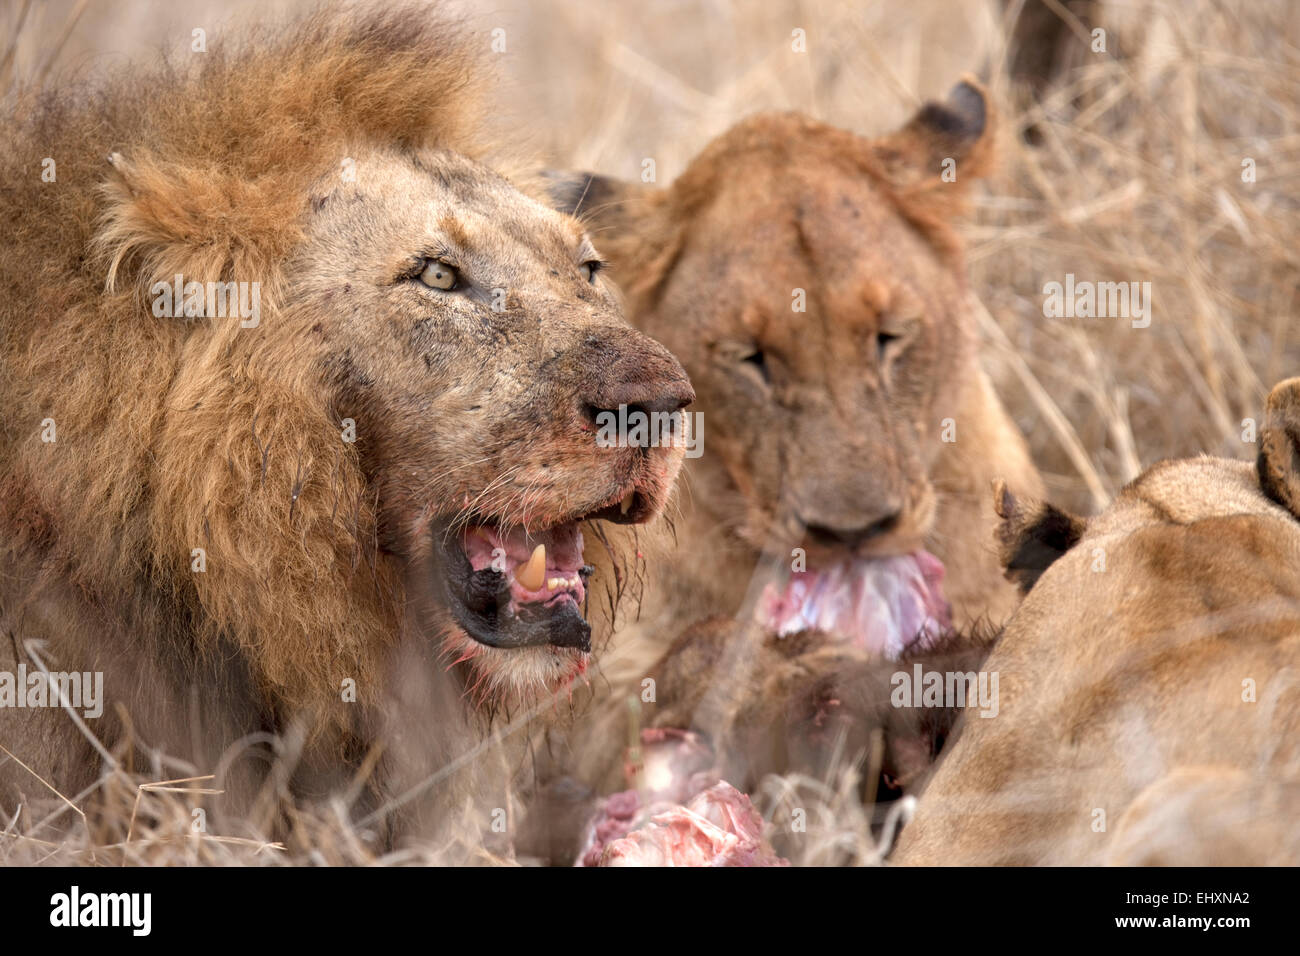 Lions (Panthera leo) eating its prey, Kruger National Park, South Africa Stock Photo